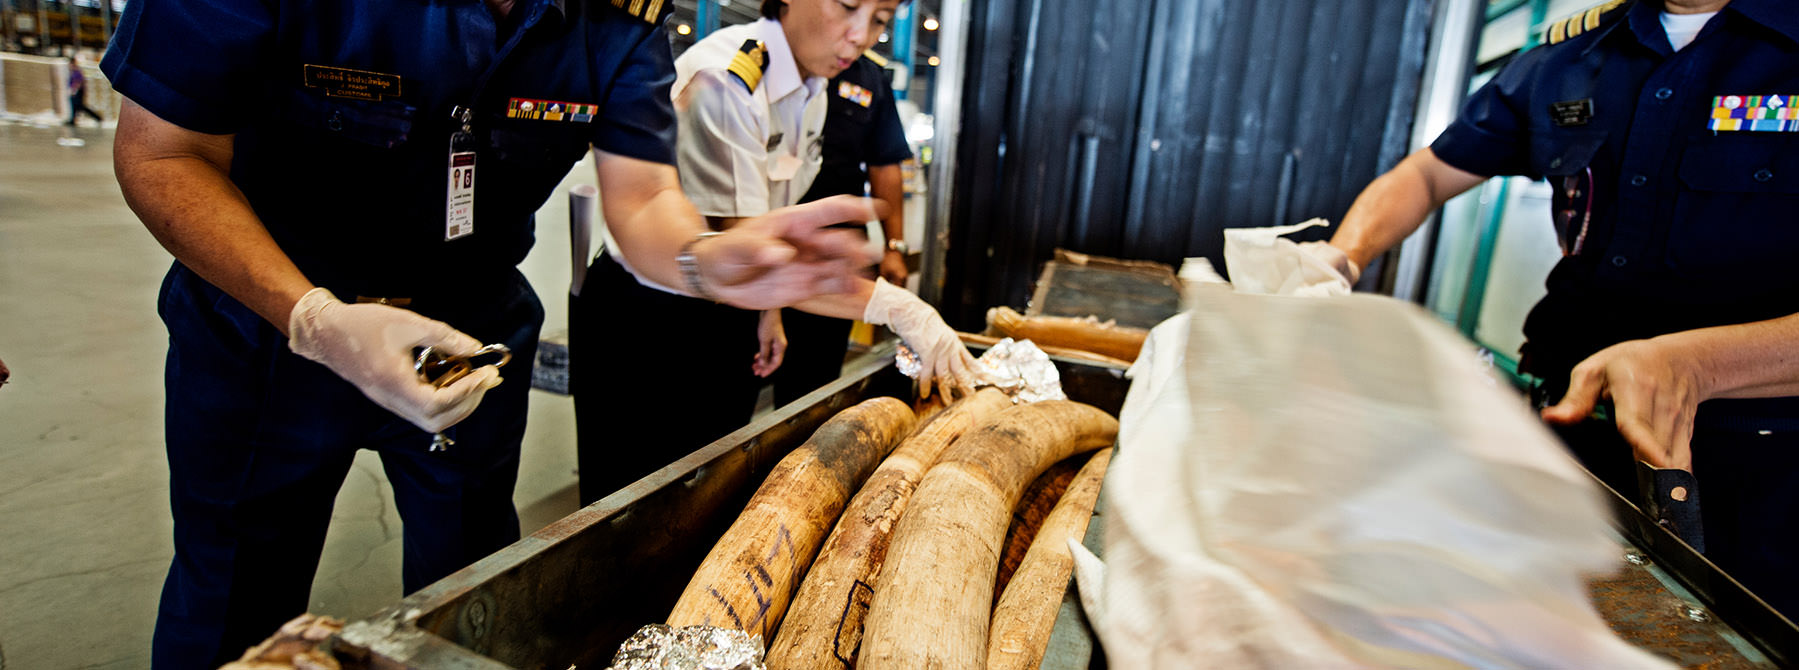 Customs officials in Suvarnabhumi discover a shipment of African elephant tusks from Mozambique © WWF / James Morgan